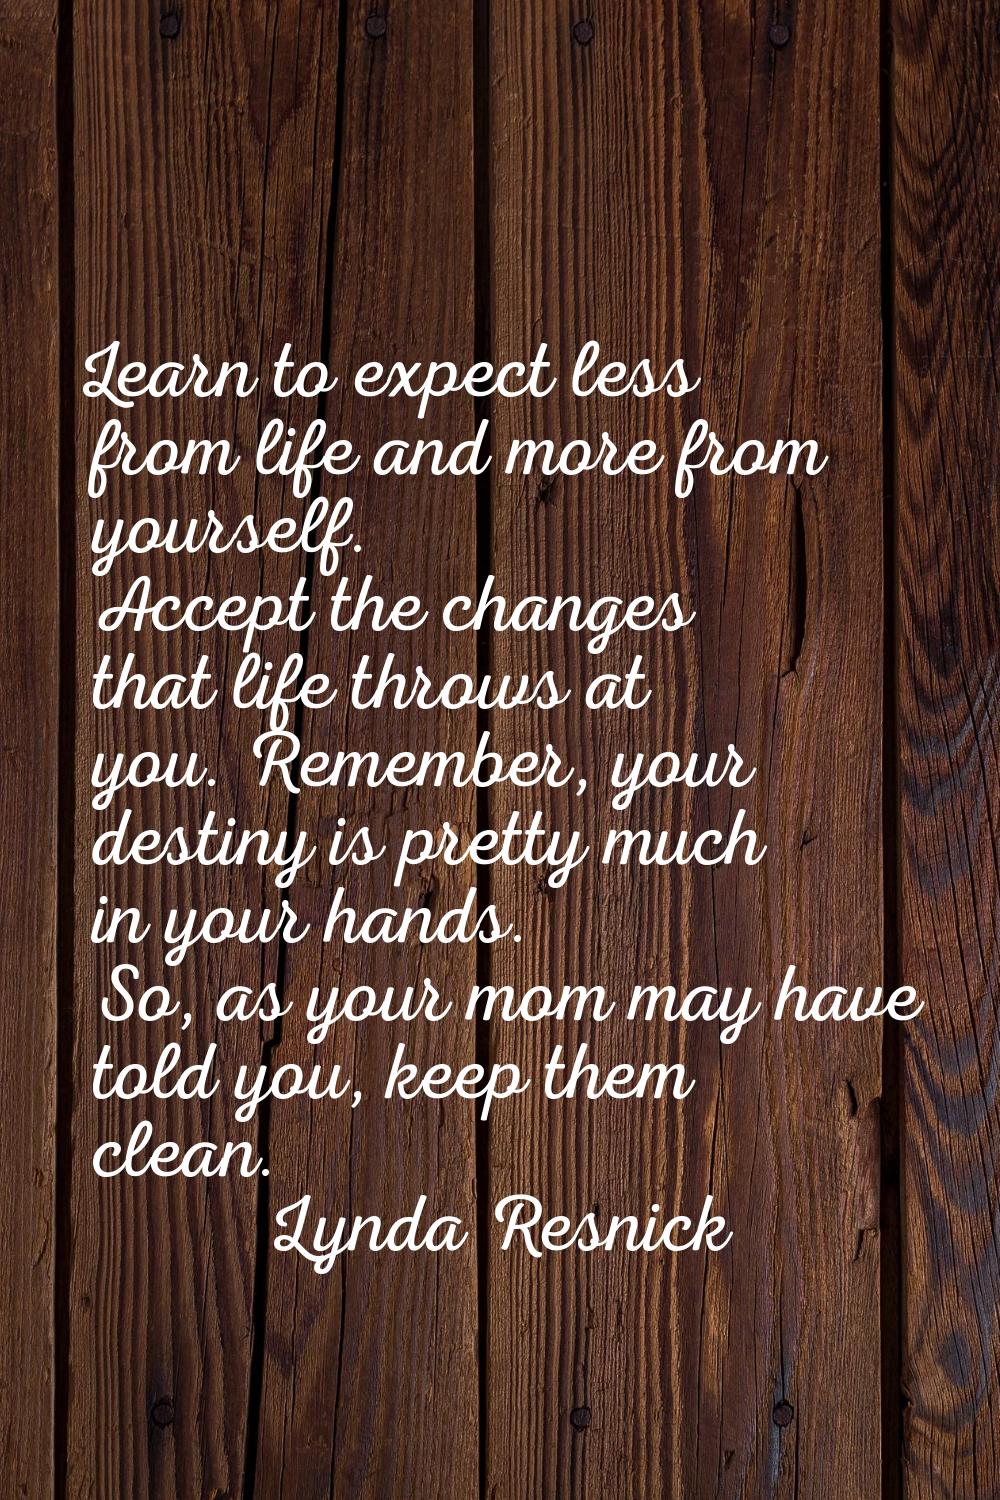 Learn to expect less from life and more from yourself. Accept the changes that life throws at you. 